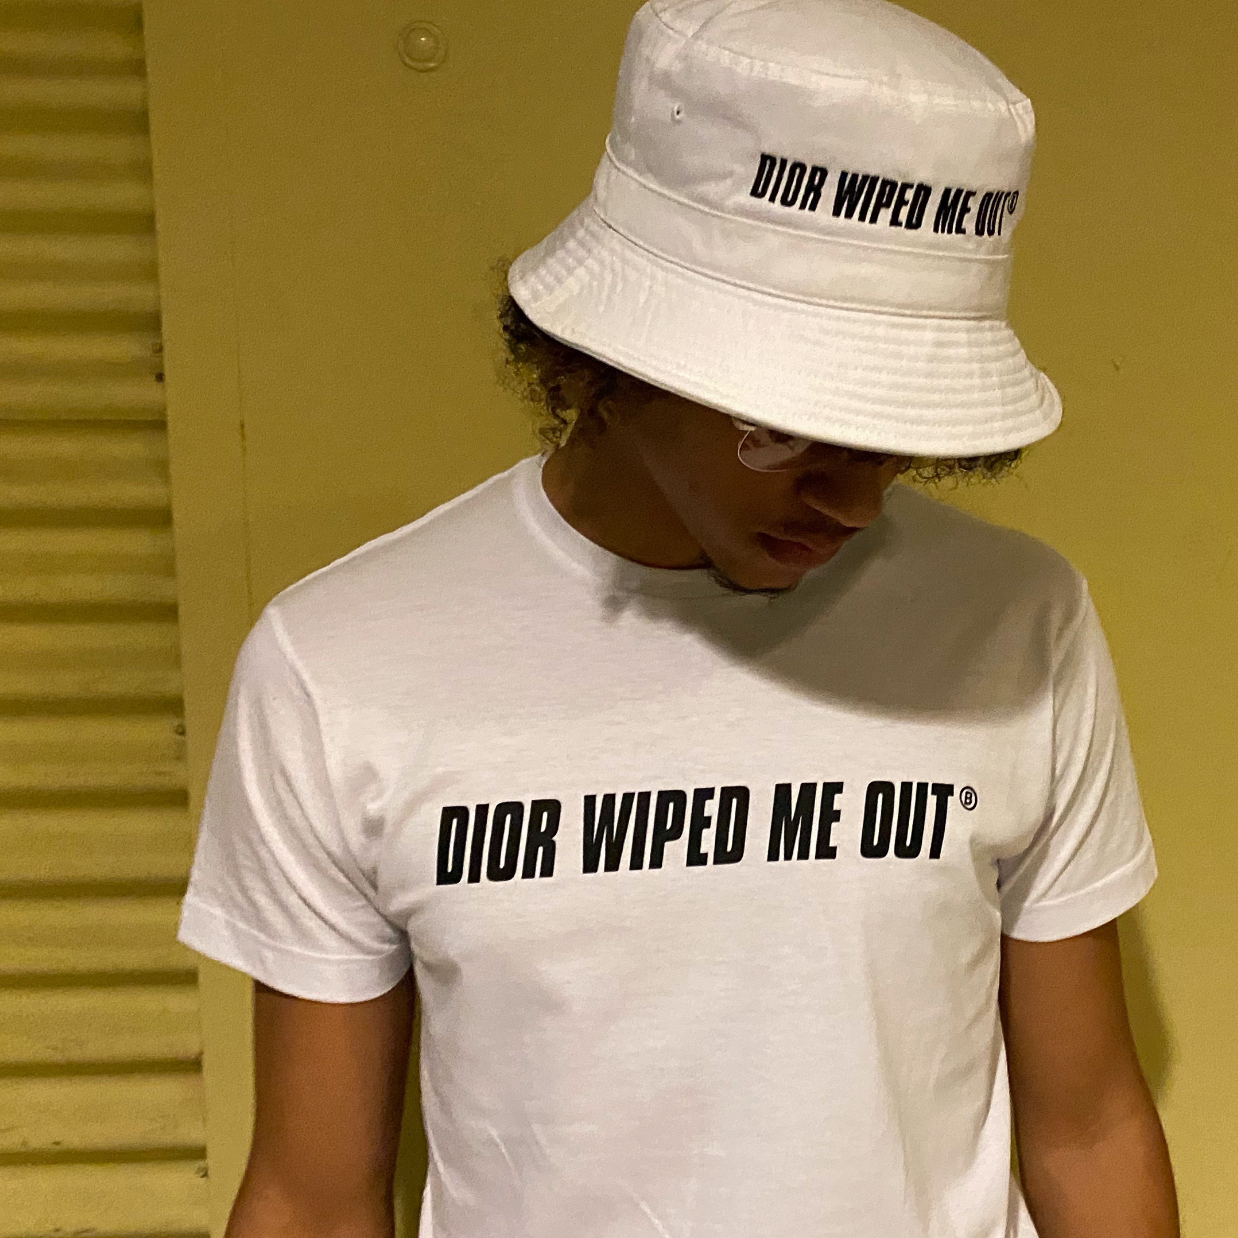 WIPED ME OUT TEE